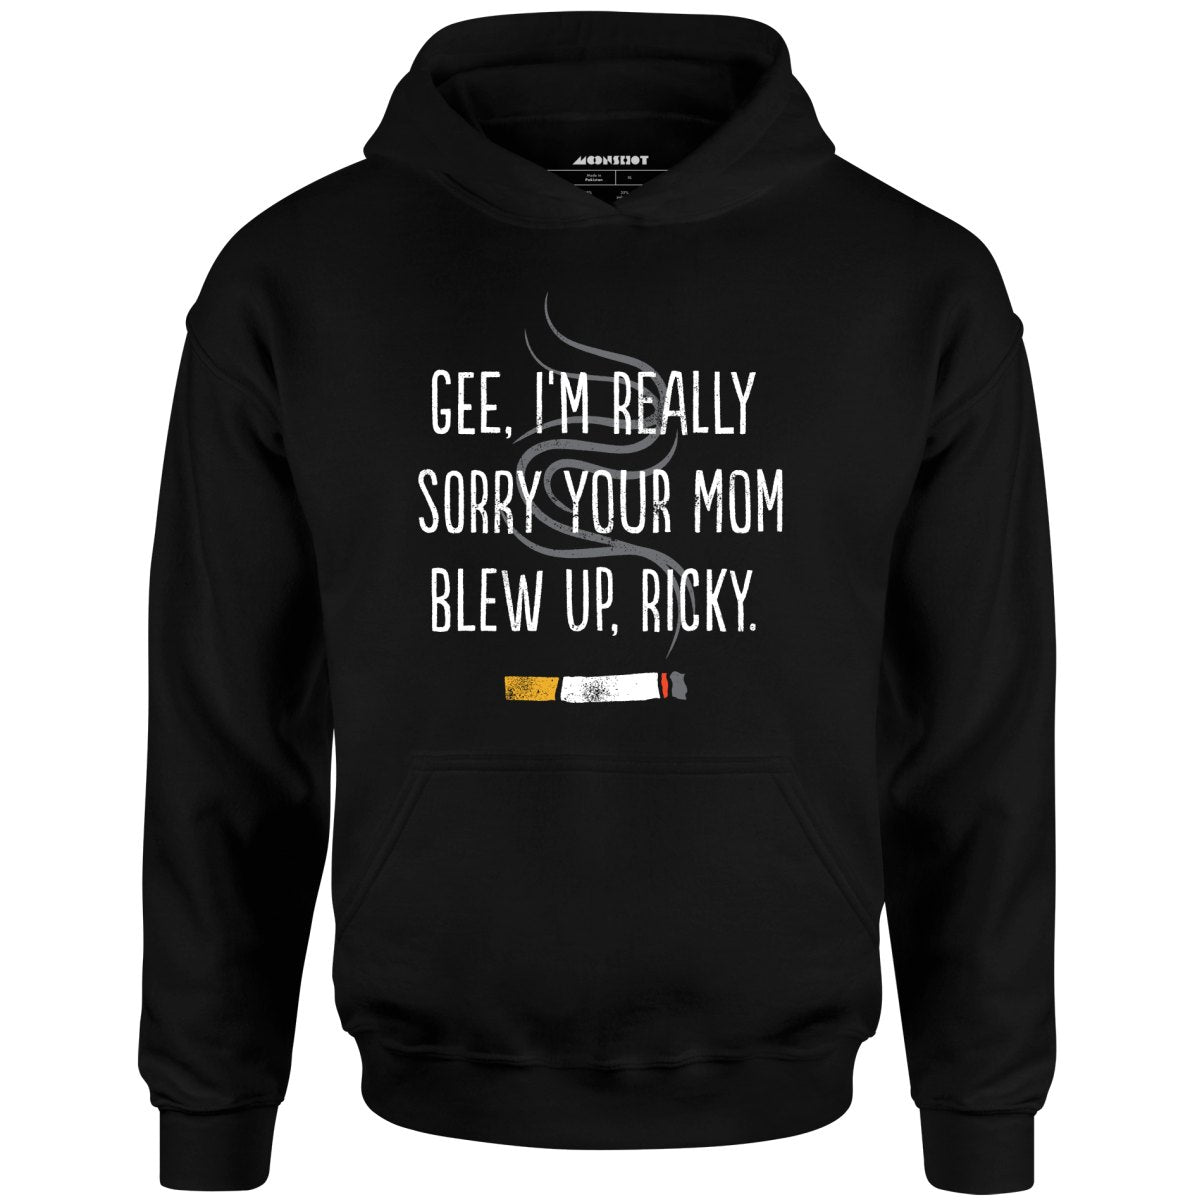 Gee, I'm Really Sorry Your Mom Blew Up, Ricky - Unisex Hoodie